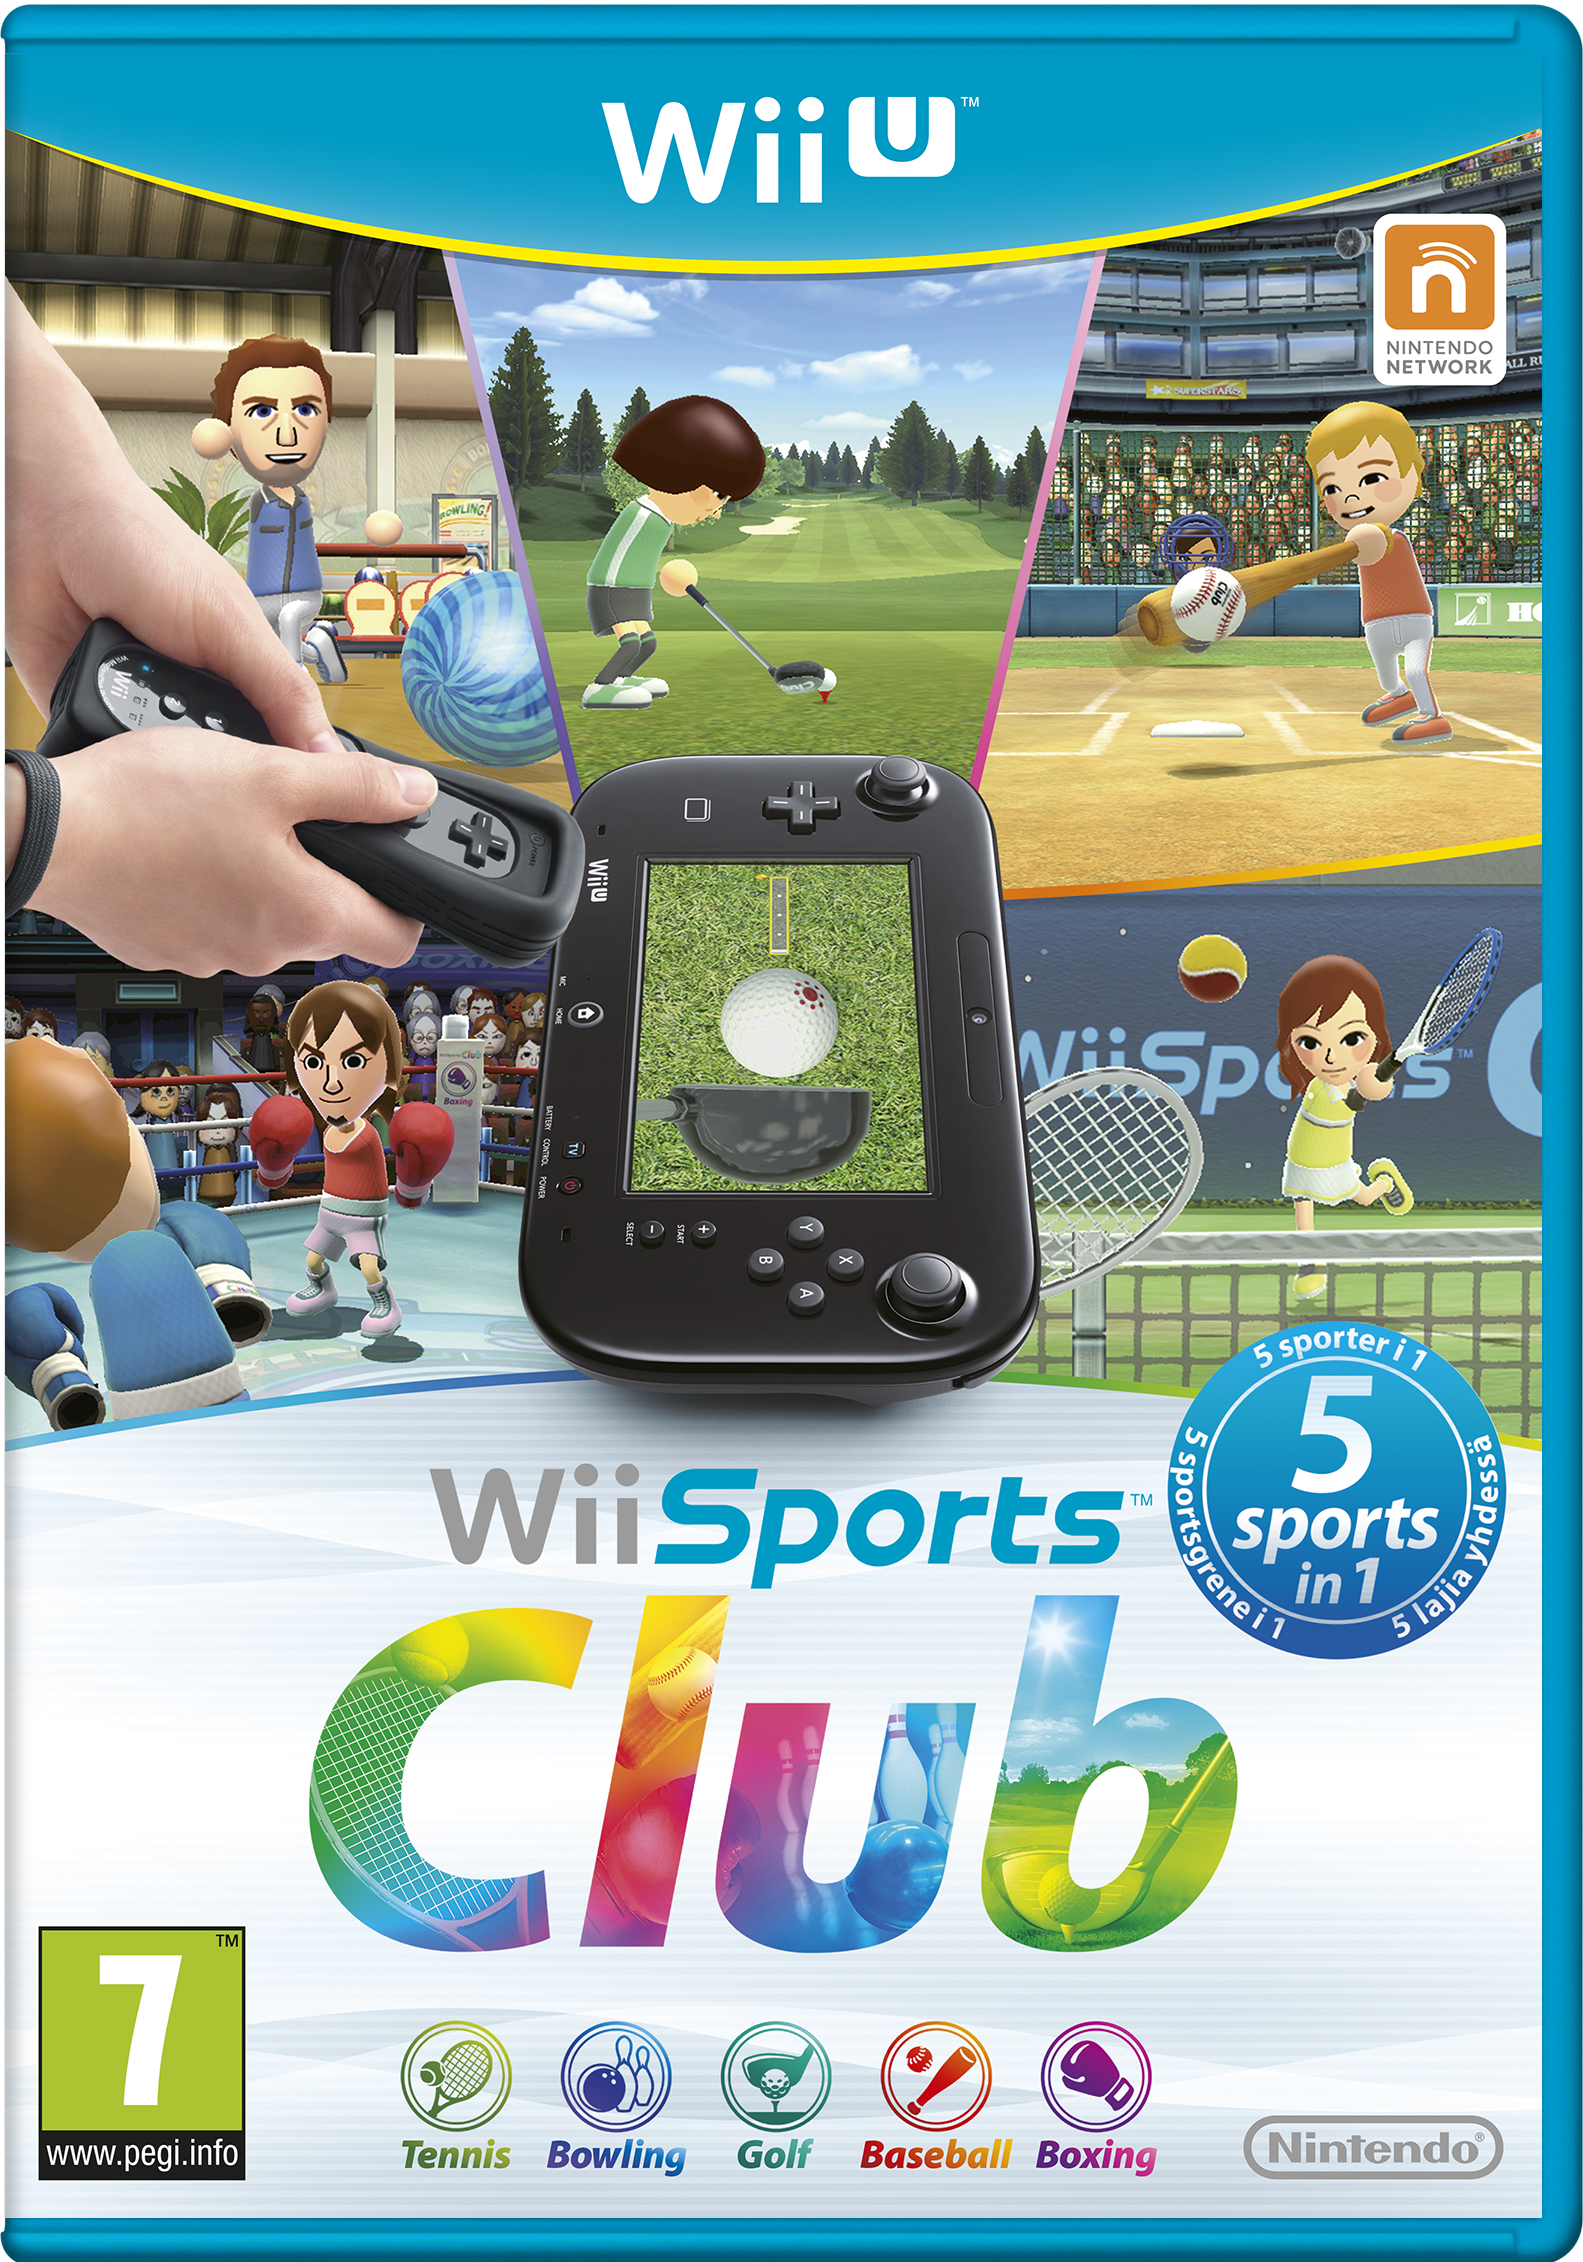 wii sports golf aiming music